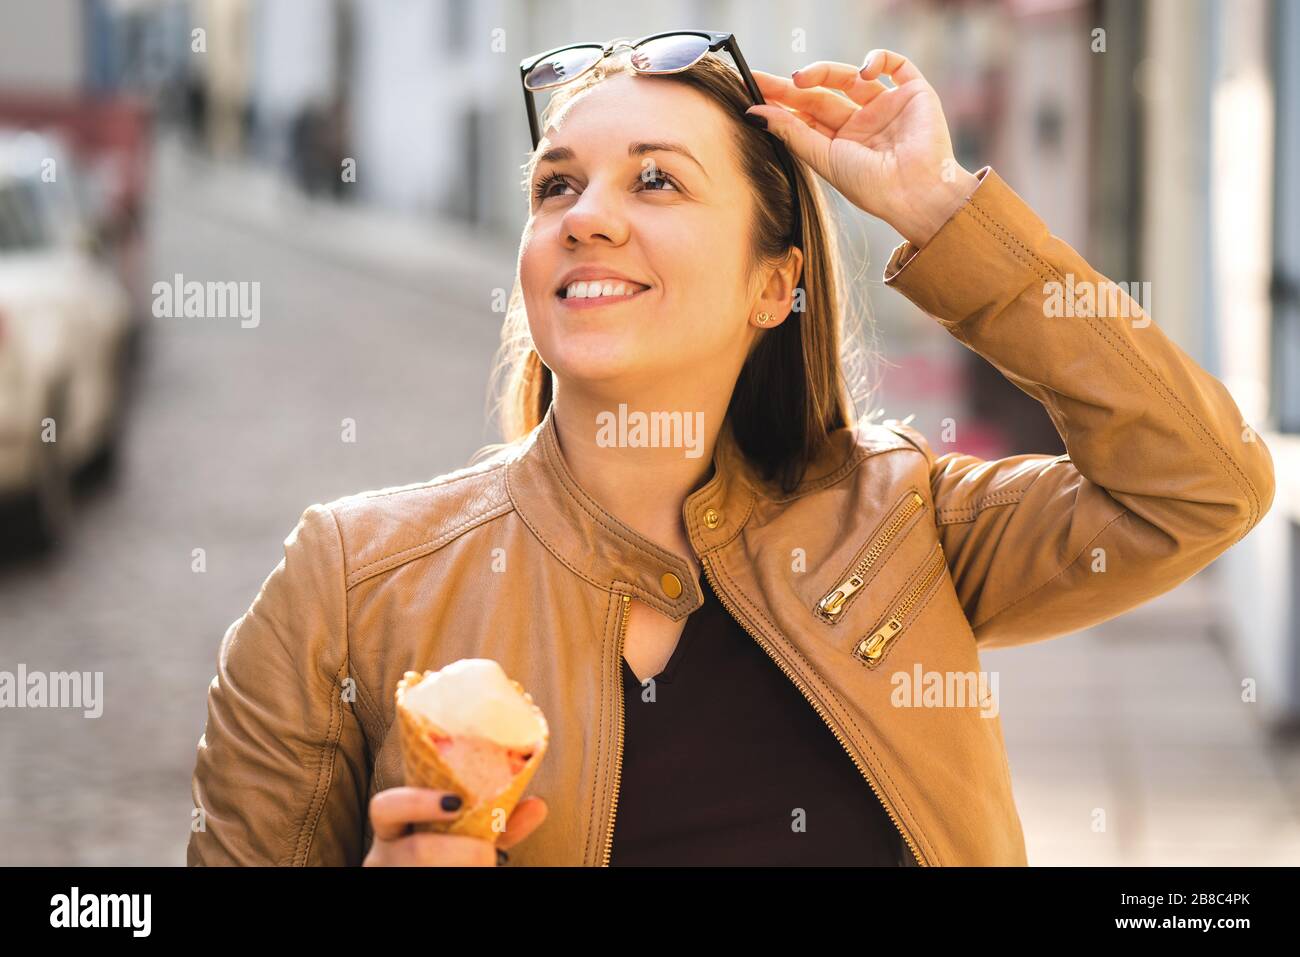 Happy woman eating ice cream and lifting sunglasses and looking up. Tourist in old town with sweet dessert during travel. Positive lifestyle at sunset. Stock Photo